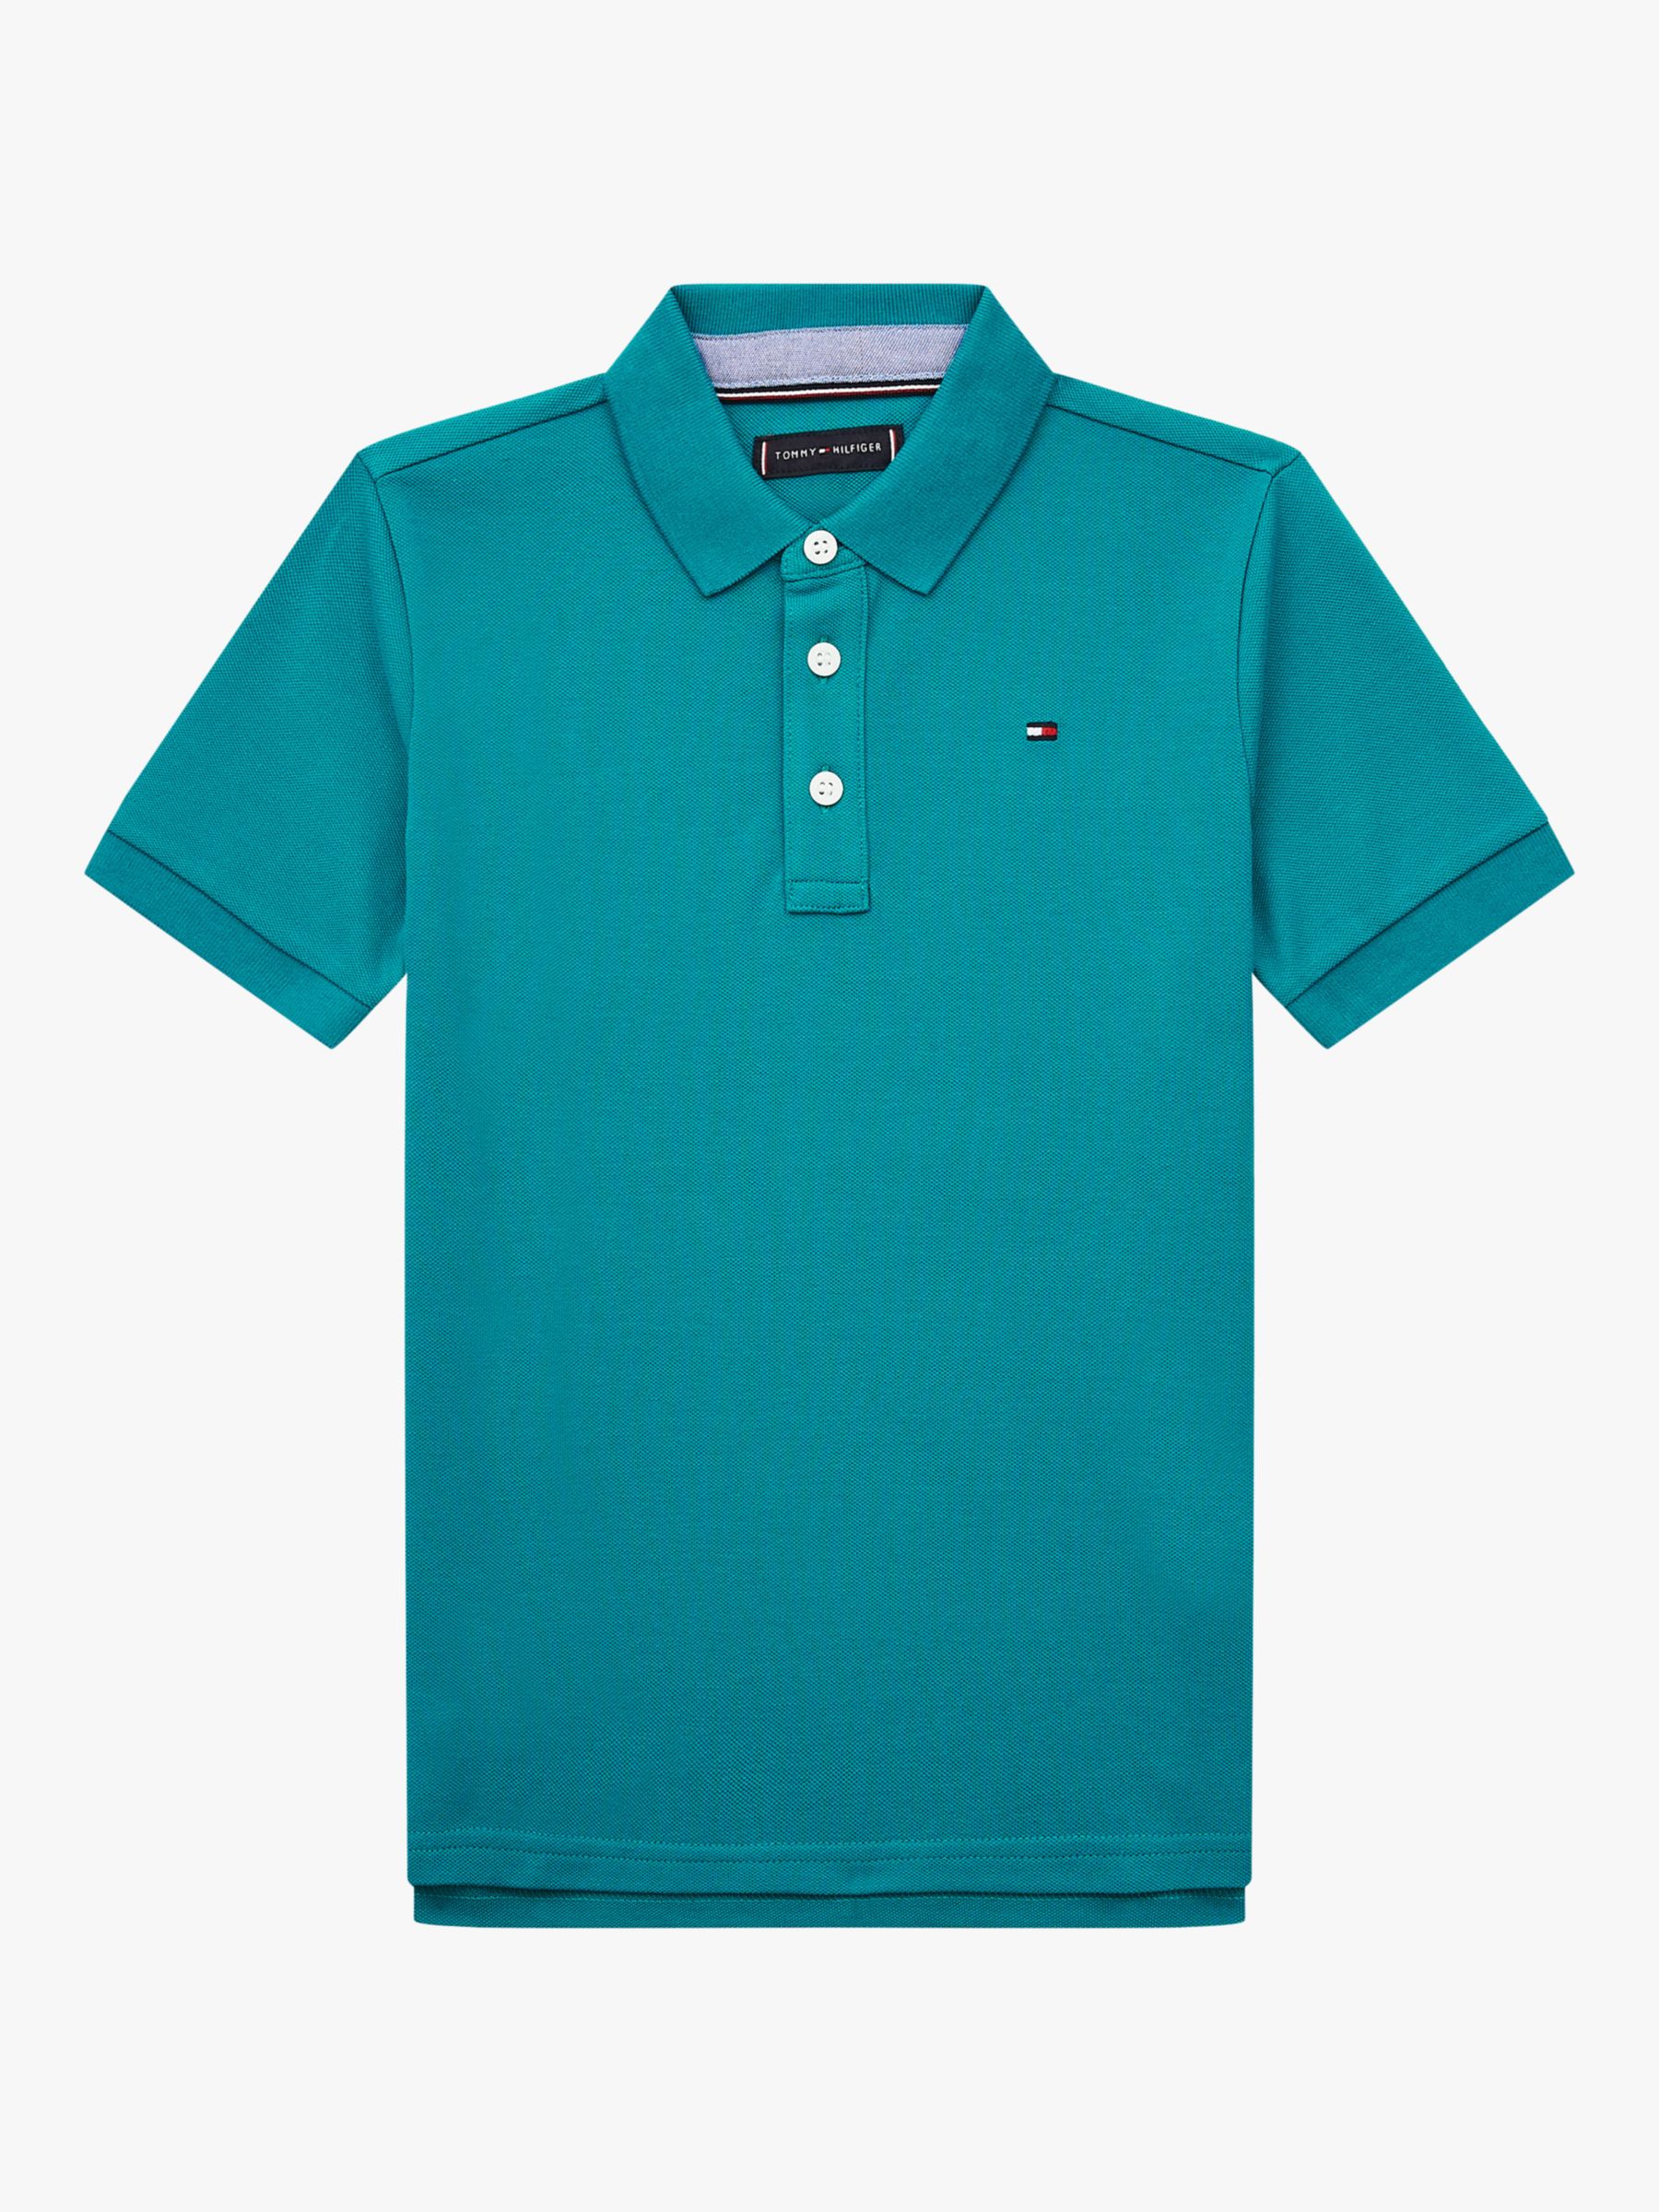 Tommy Hilfiger Kids' Essential Polo Shirt, Teal, 3 years